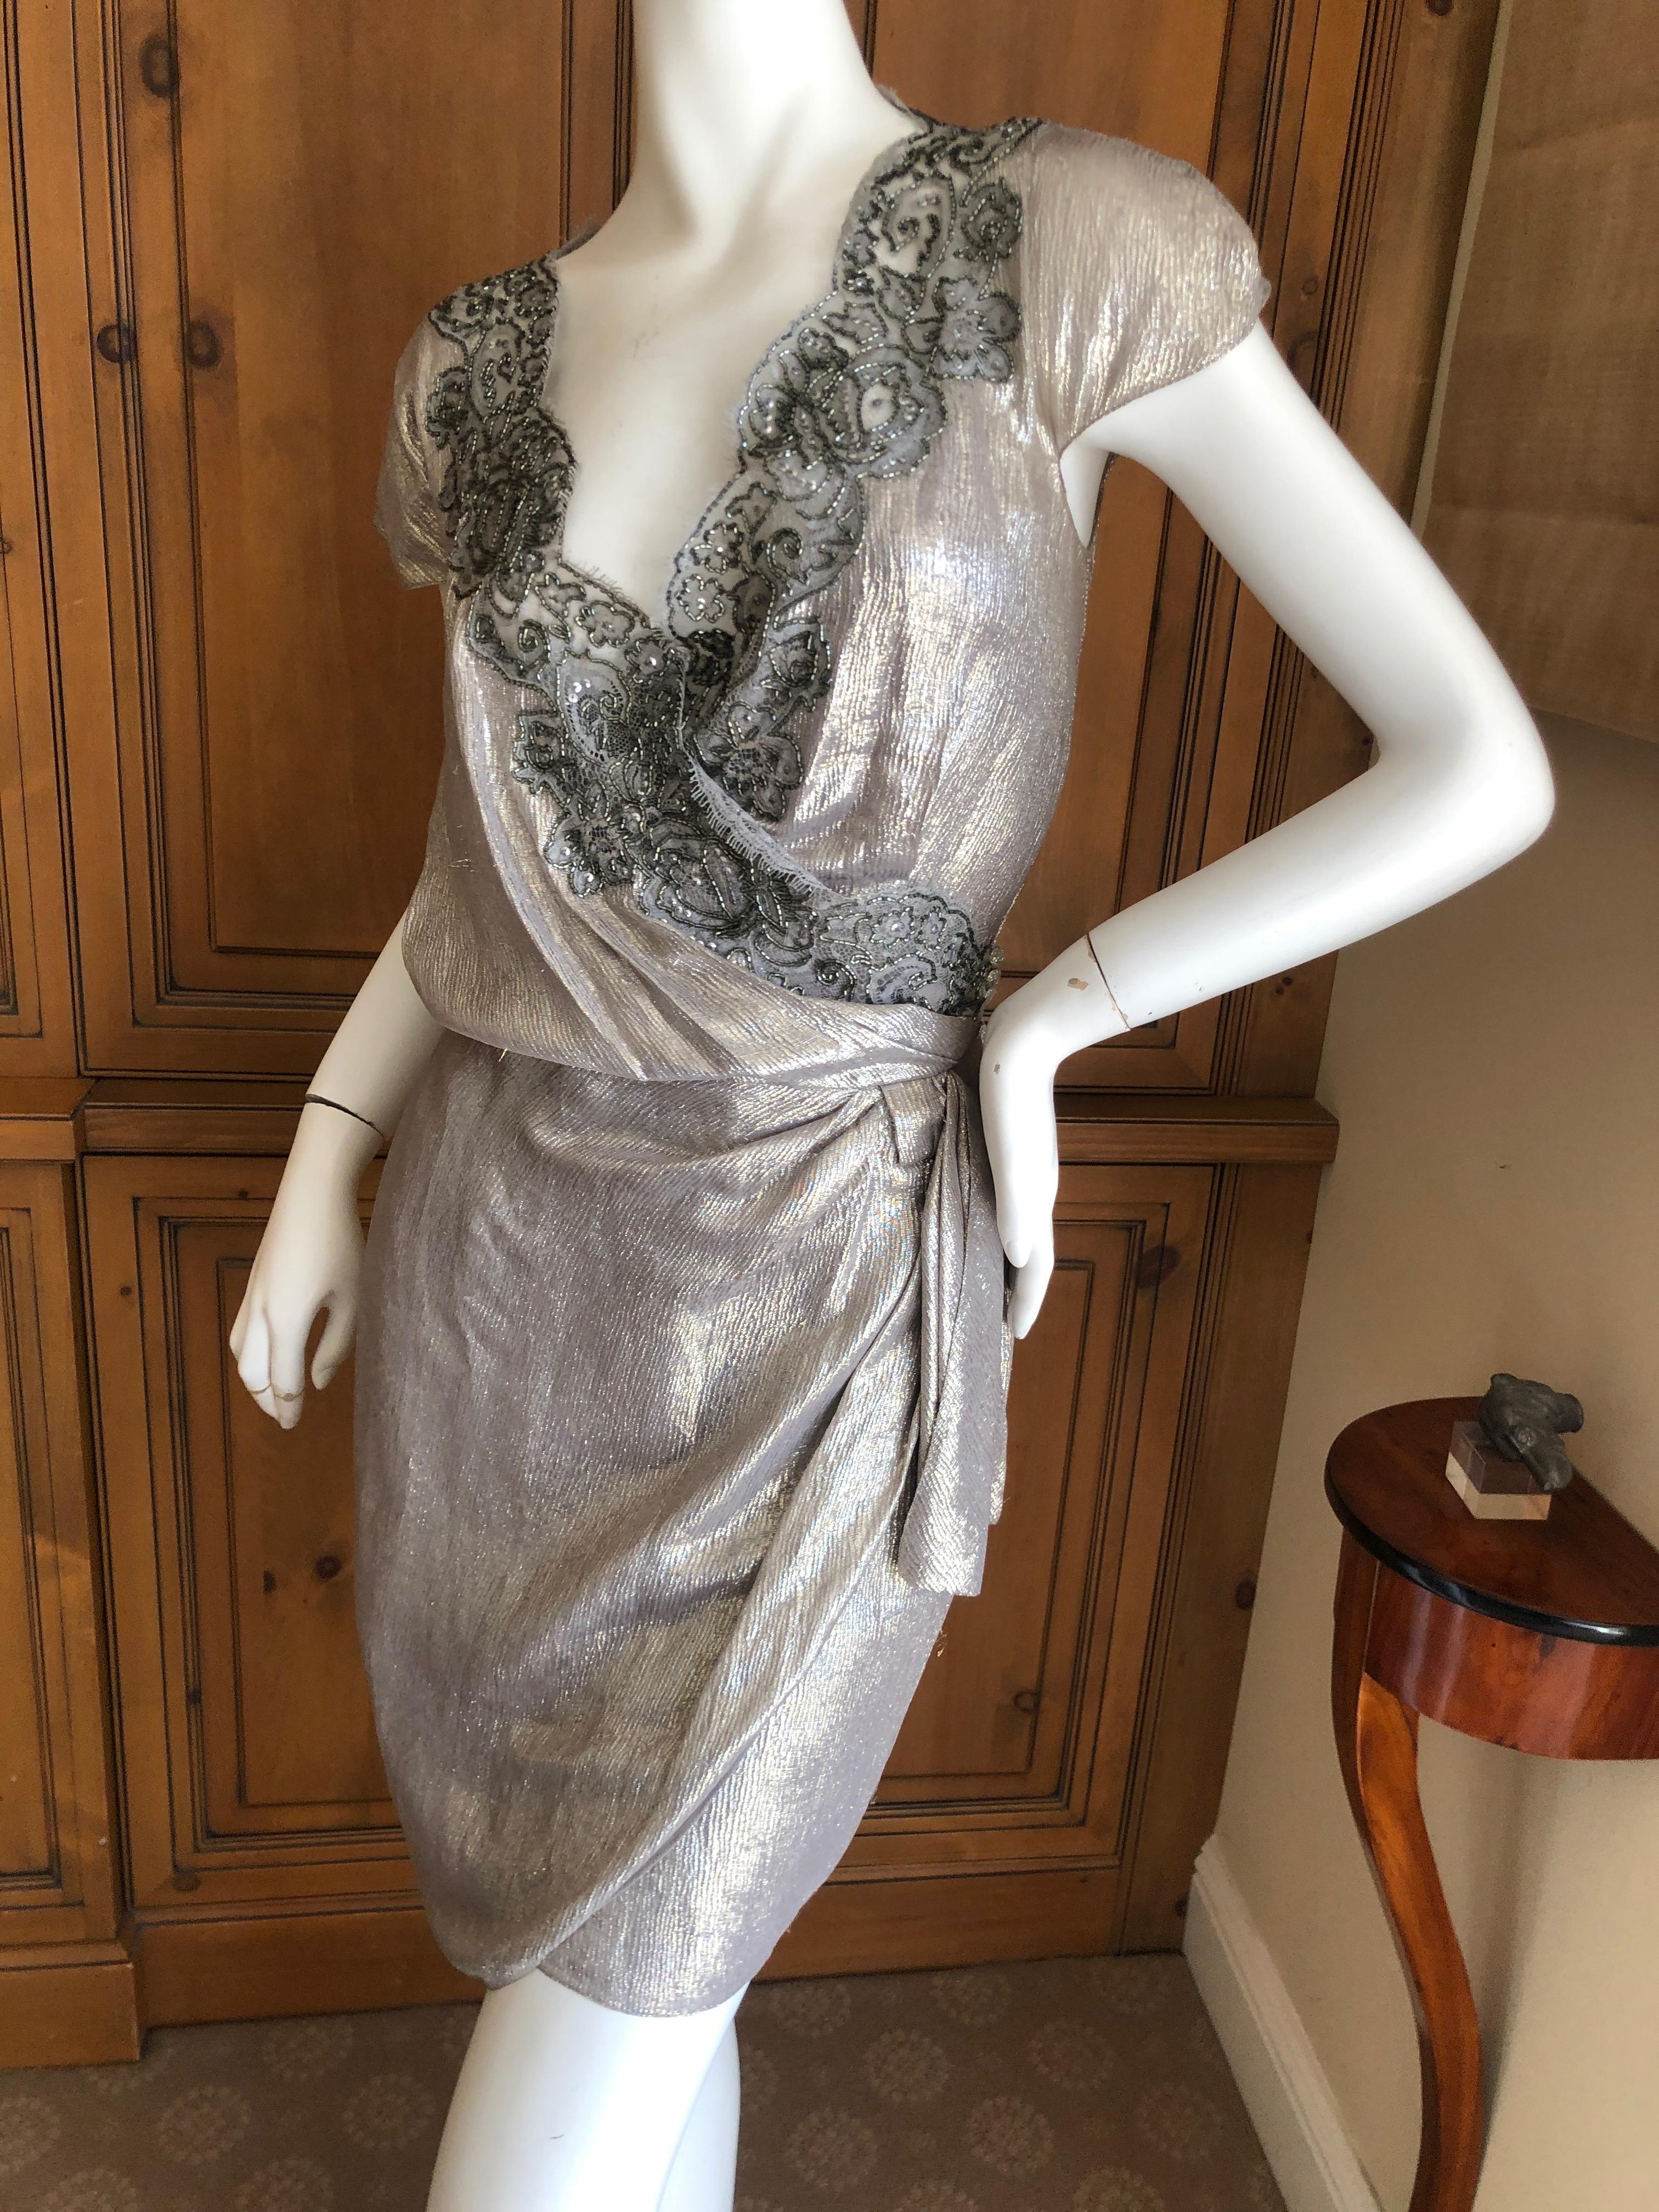  Christian Dior by Gianfranco Ferre Bead Embellished Metallic Wrap Dress  For Sale 3